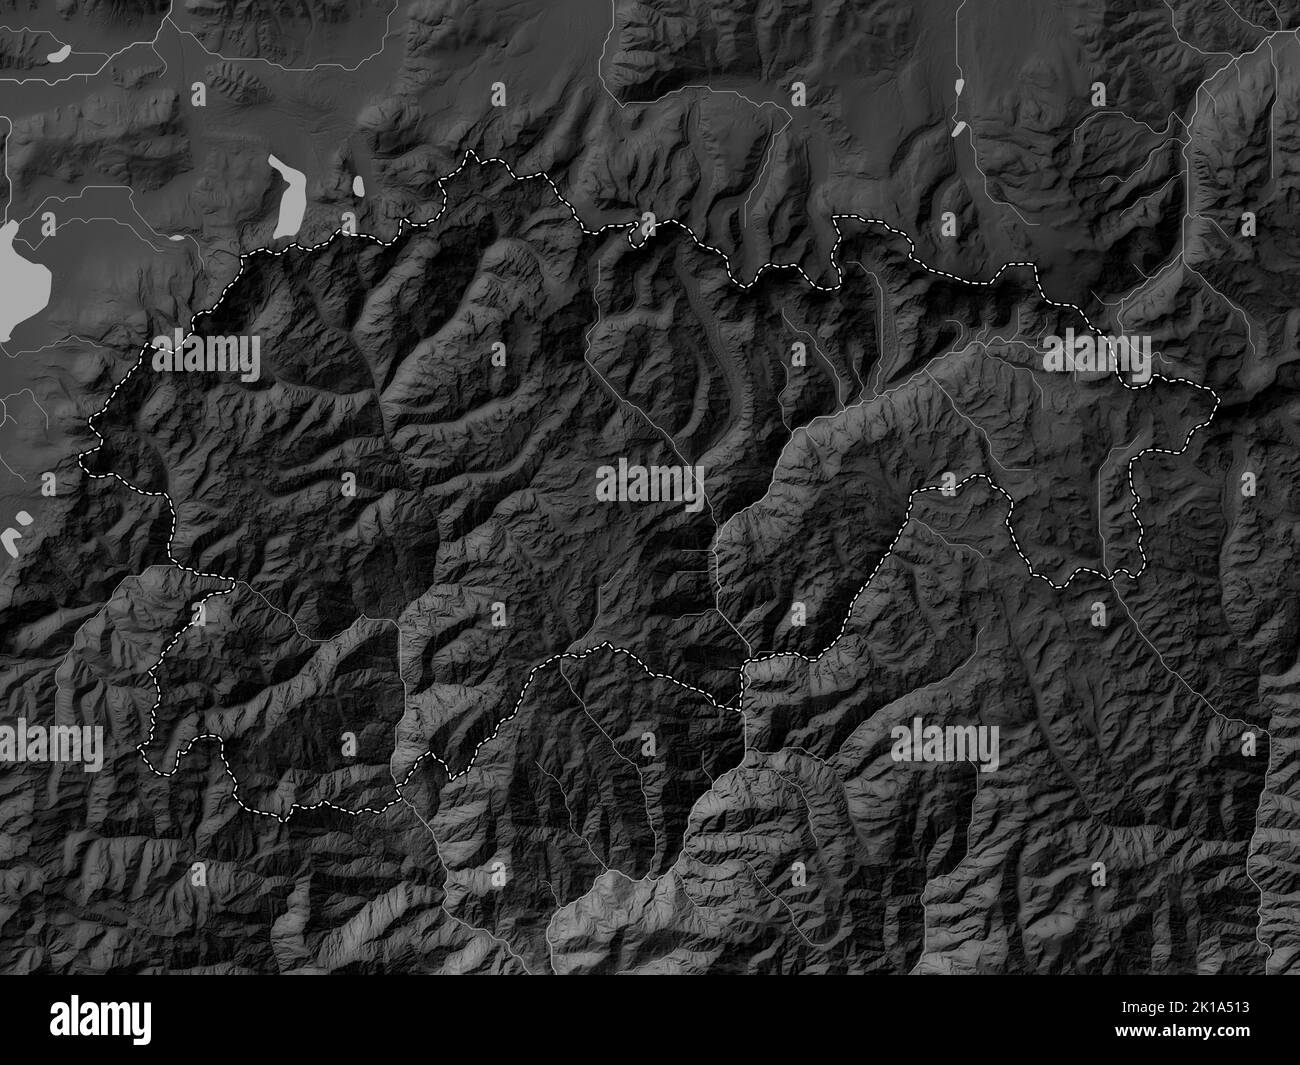 Gasa, district of Bhutan. Grayscale elevation map with lakes and rivers Stock Photo